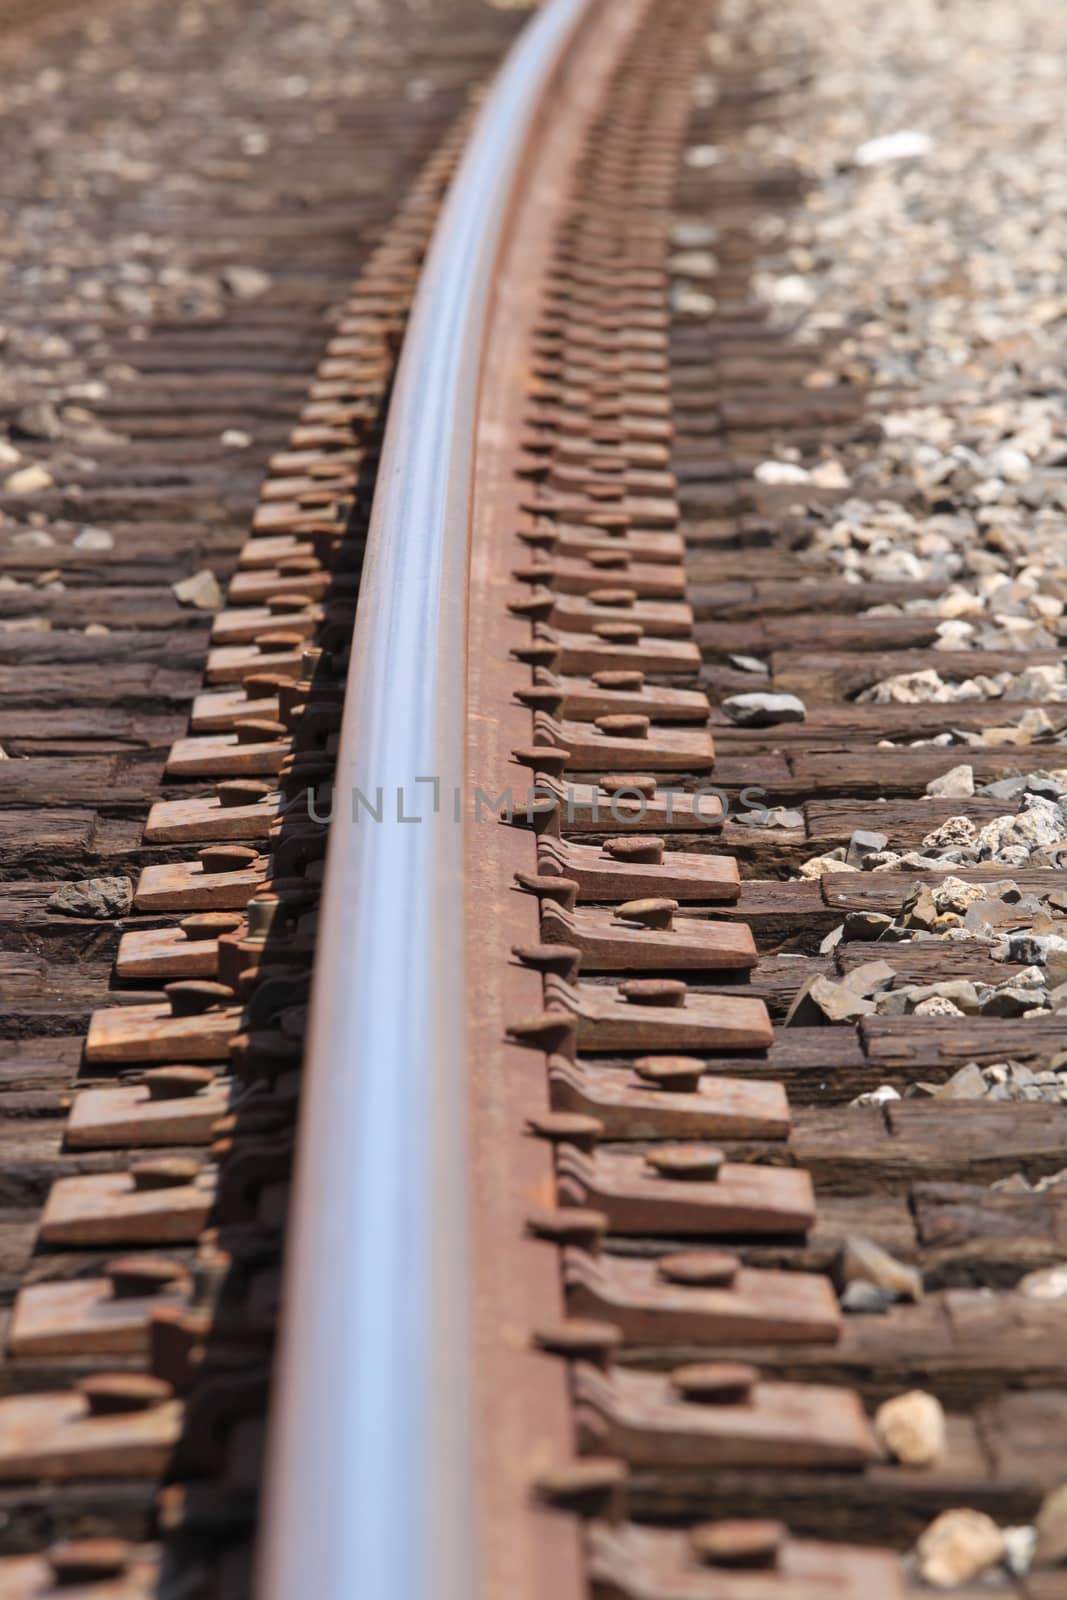 One single train track in gravel with a curve.